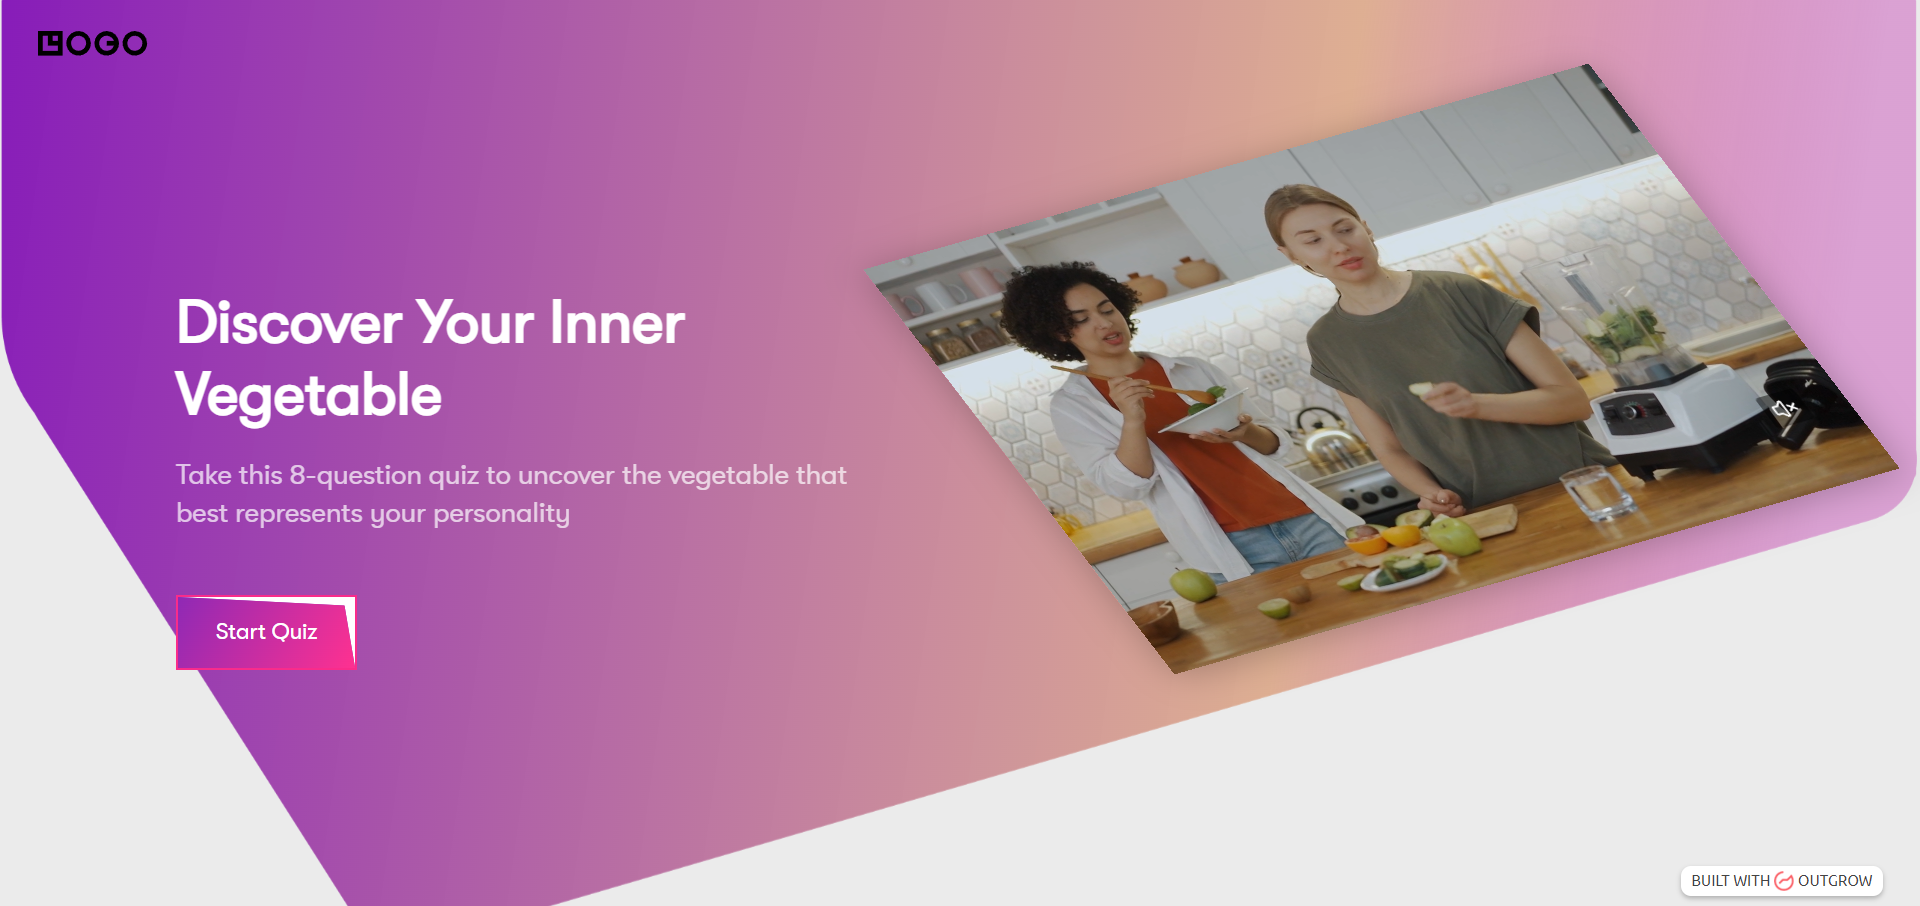 Discover Your Inner Vegetable